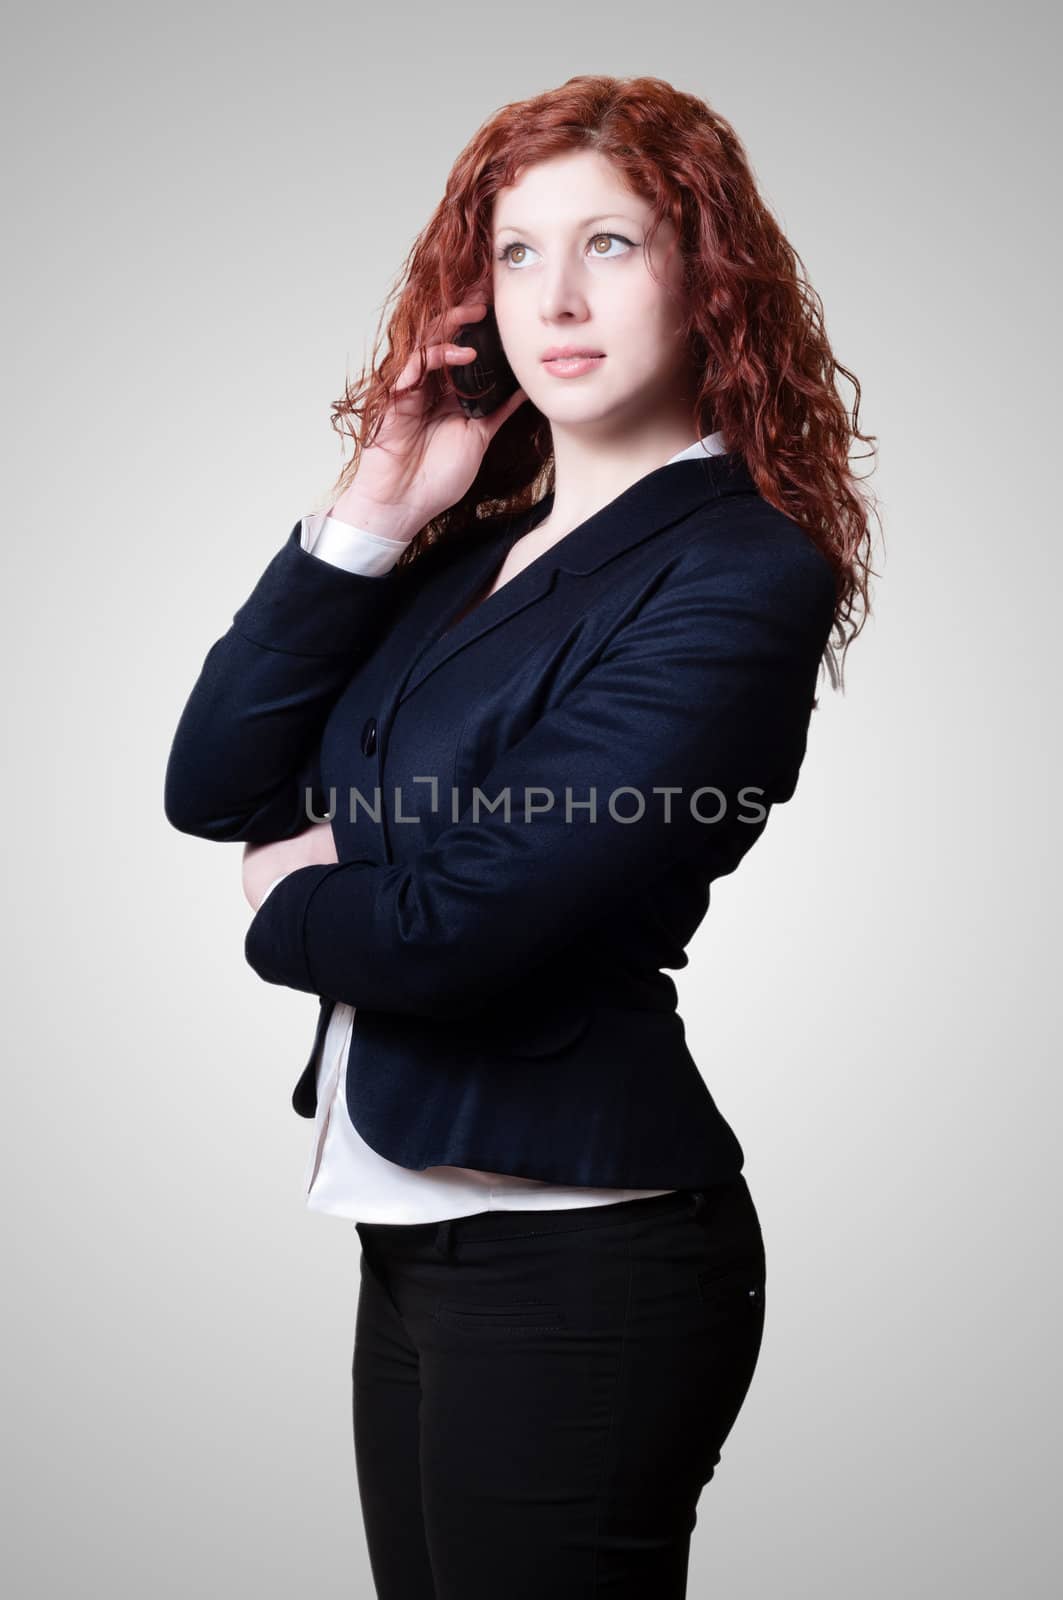 long red hair businesswoman on the phone on gray background